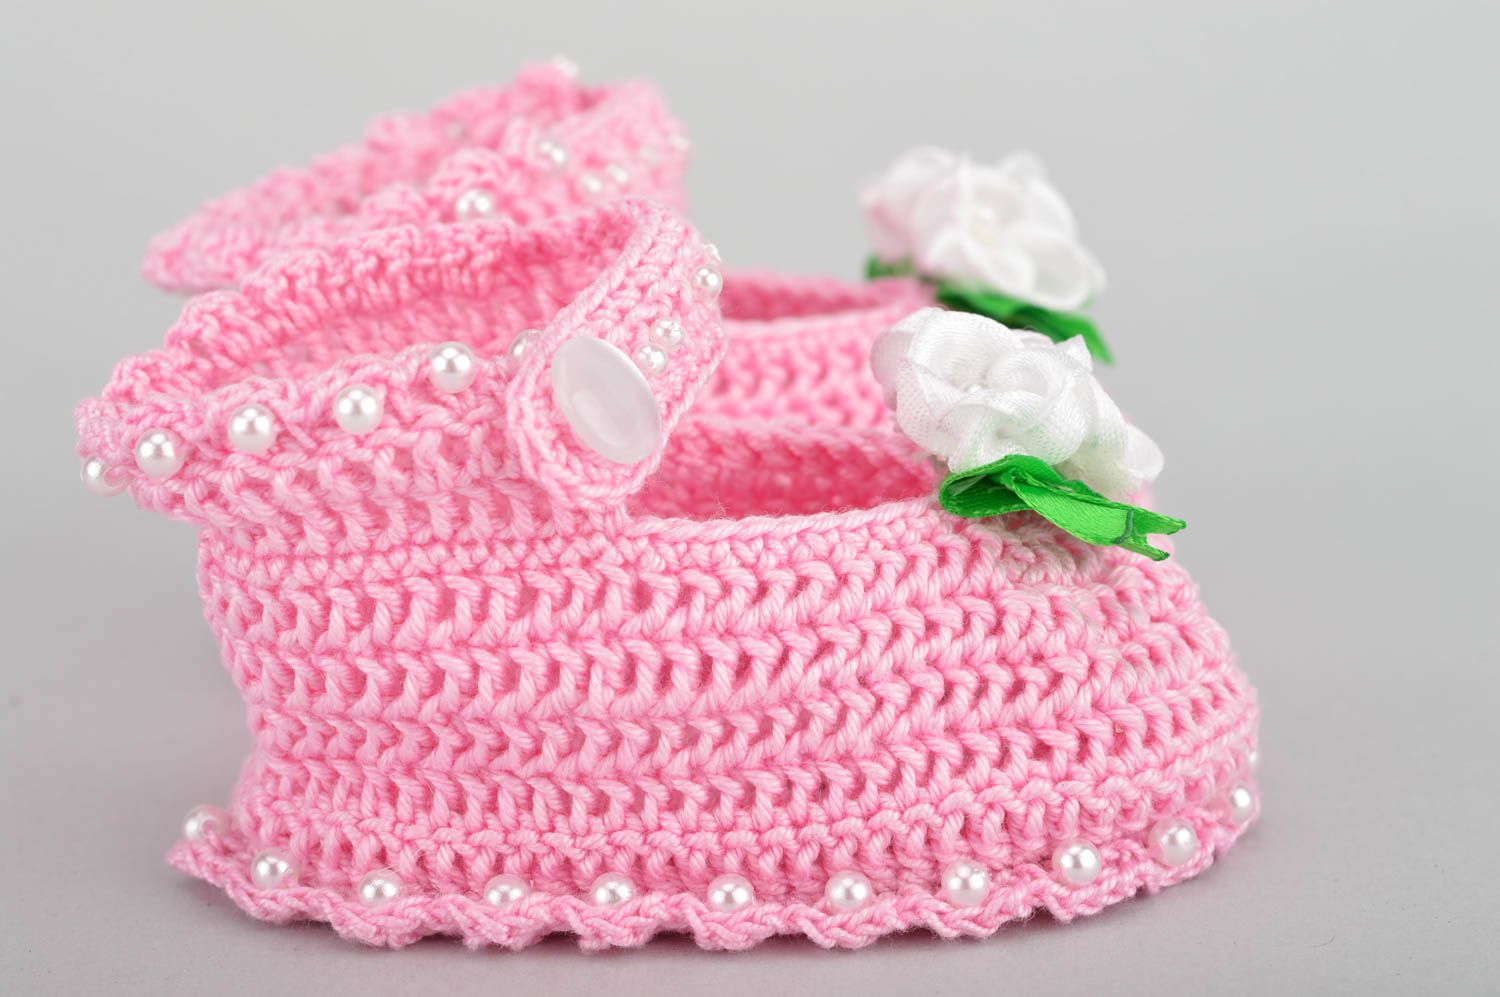 Crocheted cute designer handmade pink baby bootees made of acryl for girls photo 5